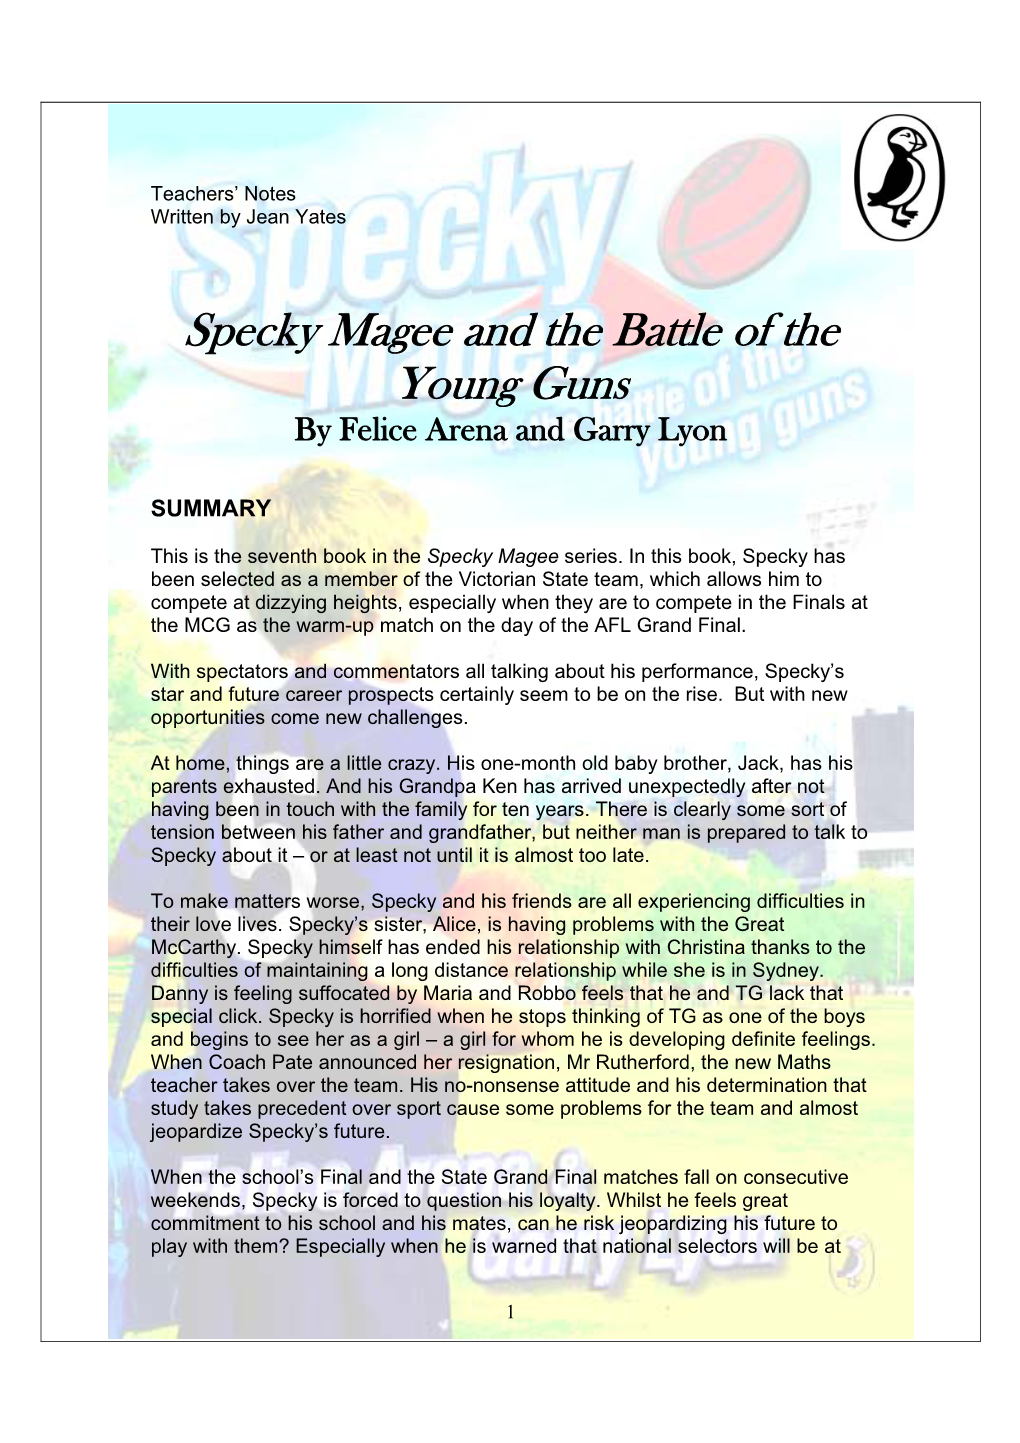 Specky Magee and the Battle of the Young Guns by Felice Arena and Garry Lyon